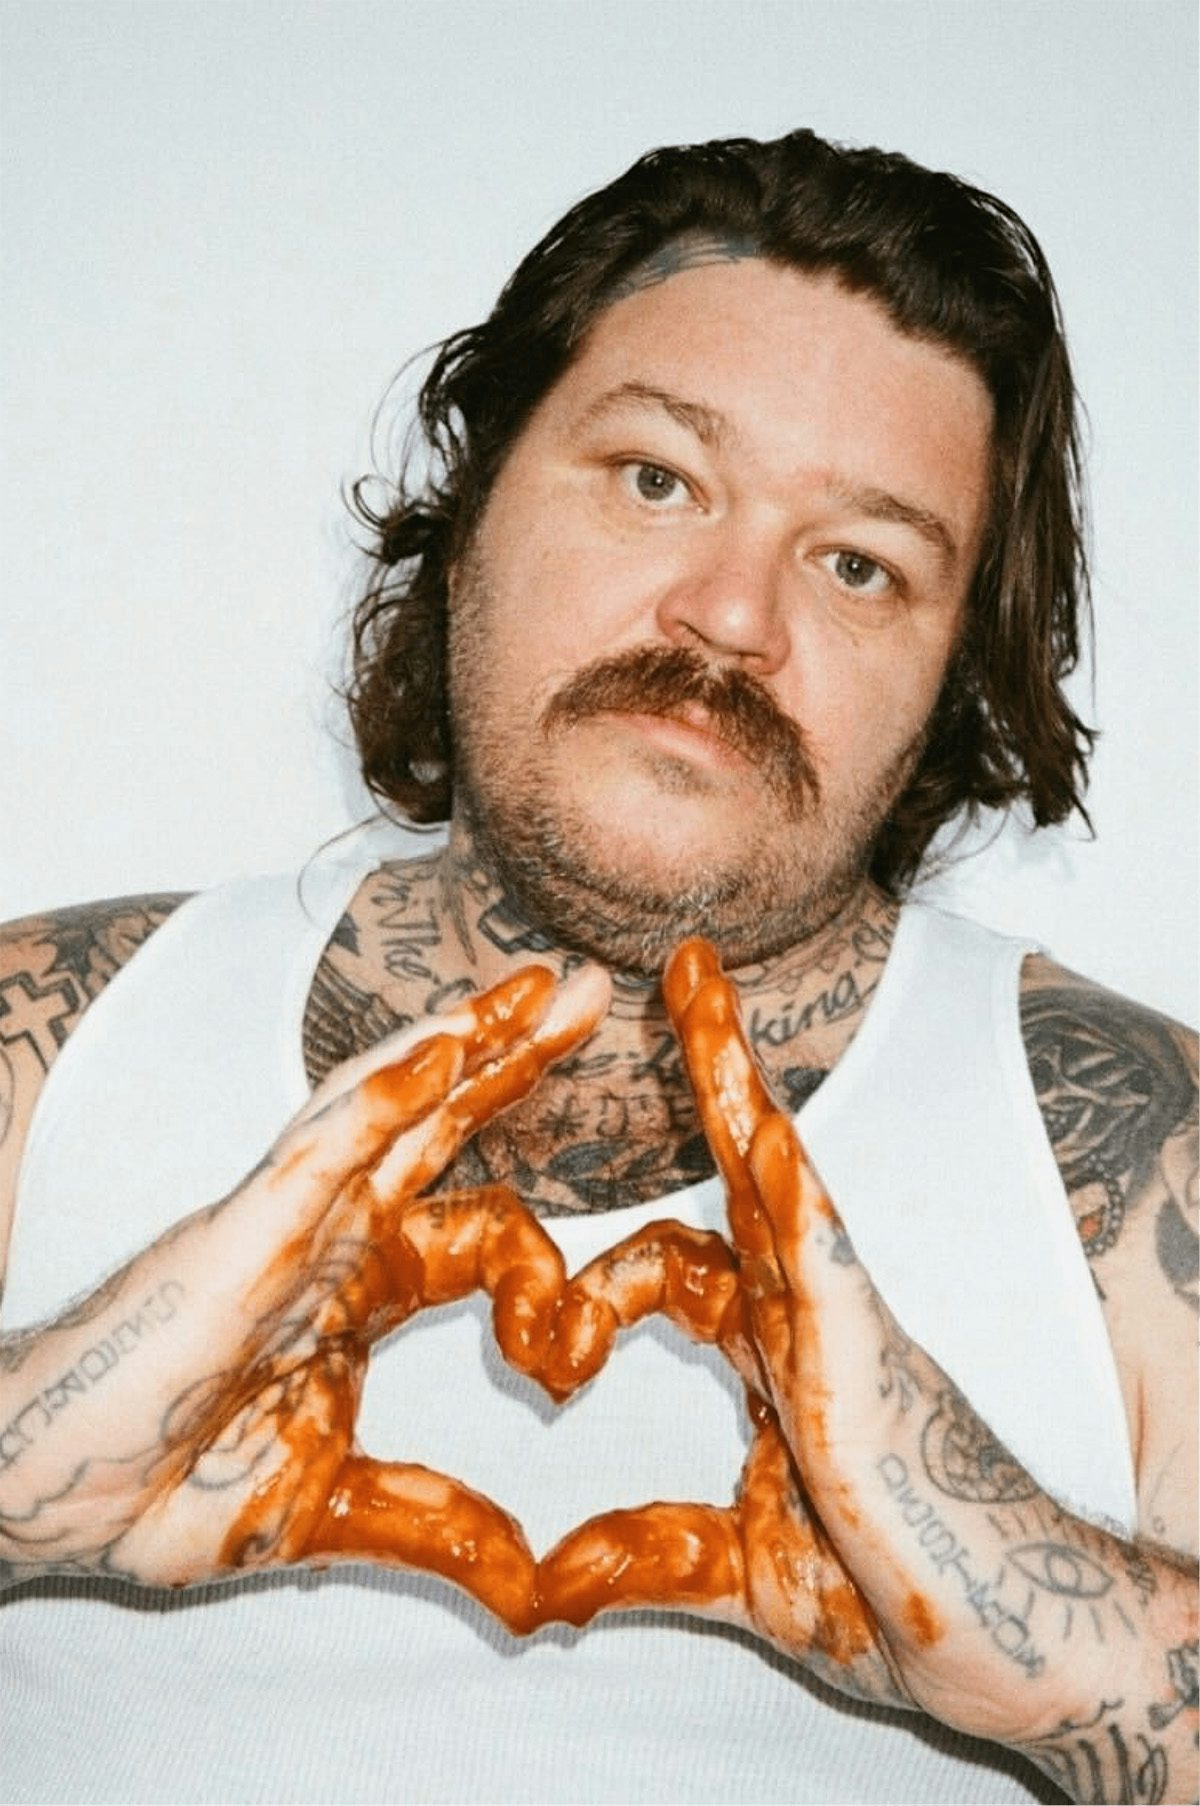 Photograph of chef Matty Matheson wearing a white vest, and joining his sauce-covered hands together in the shape of a heart